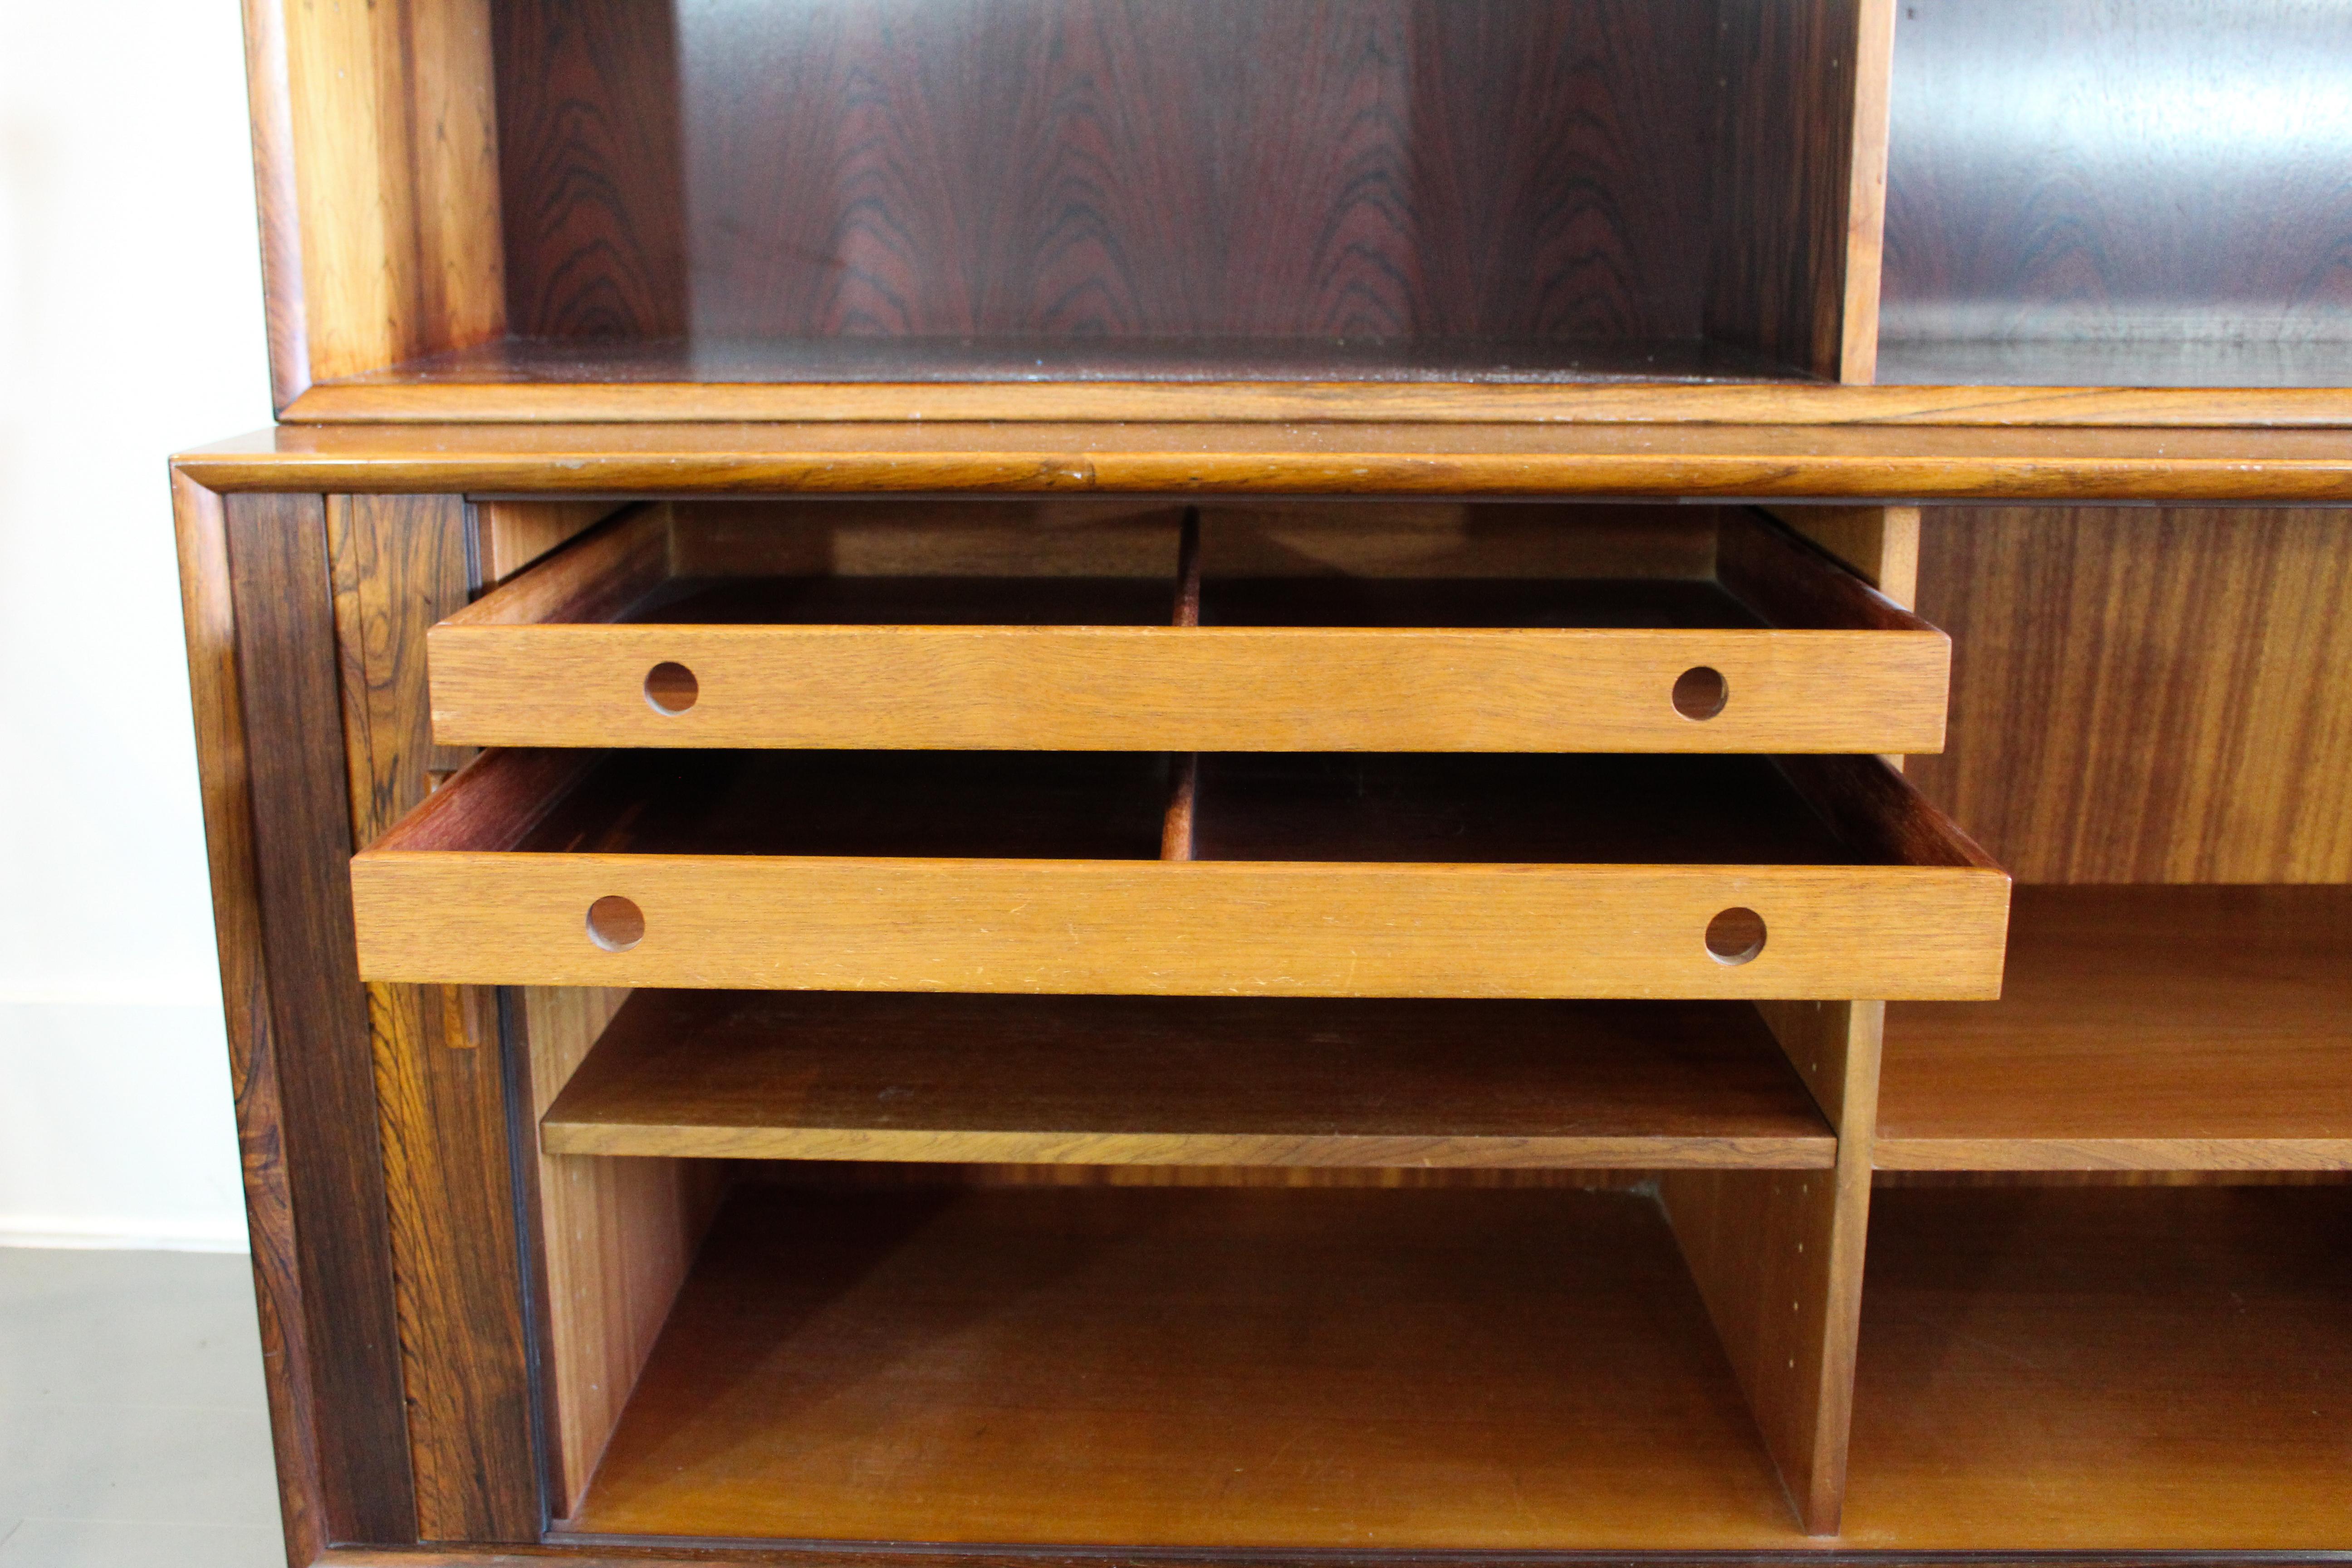 Midcentury Rosewood Arne Vodder Book Case with Tambour Doors by Sibast, 1950s For Sale 8